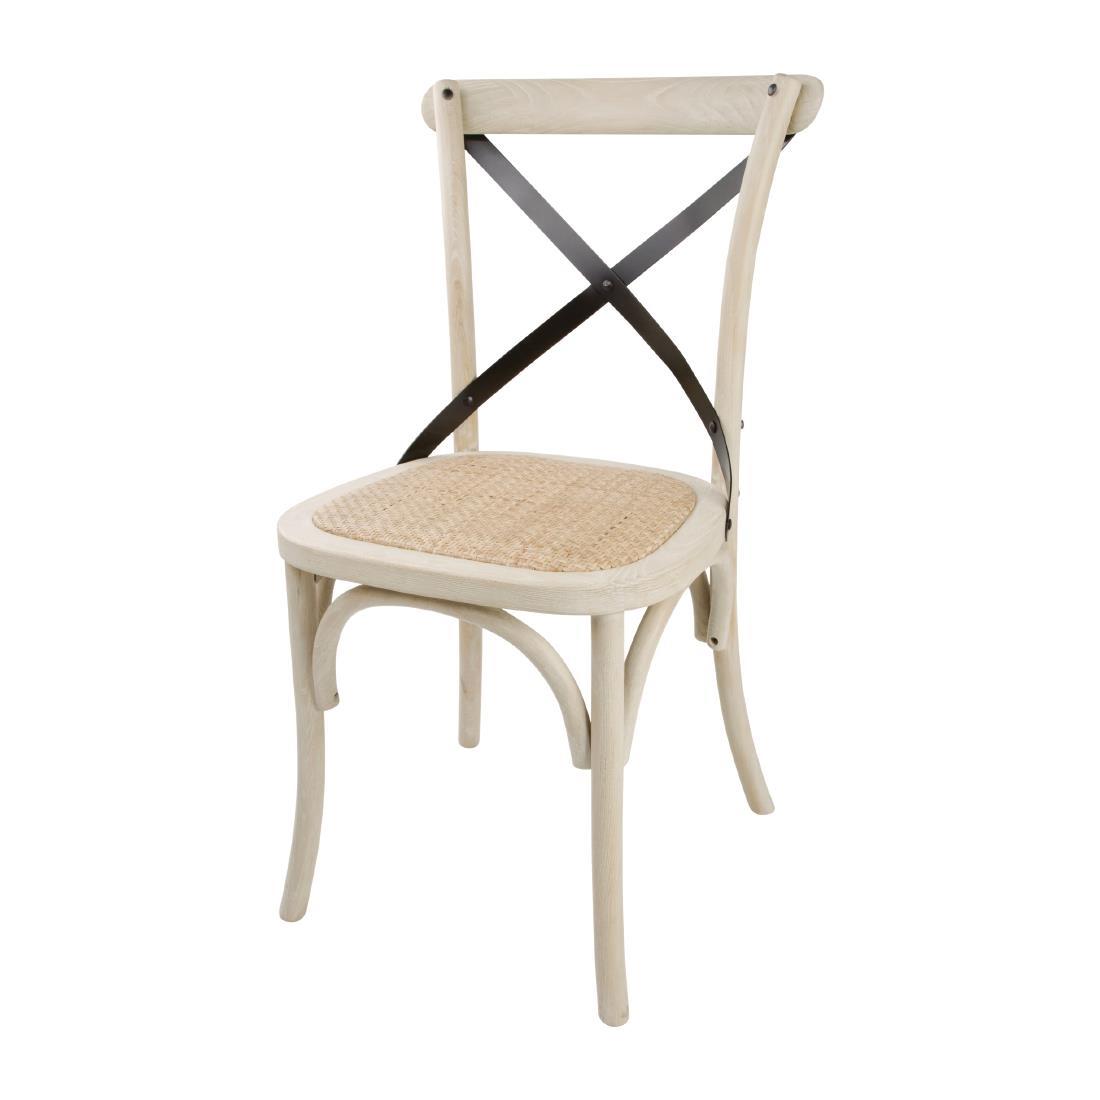 Bolero Bentwood Chairs with Metal Cross Backrest (Pack of 2) - DR306  - 2